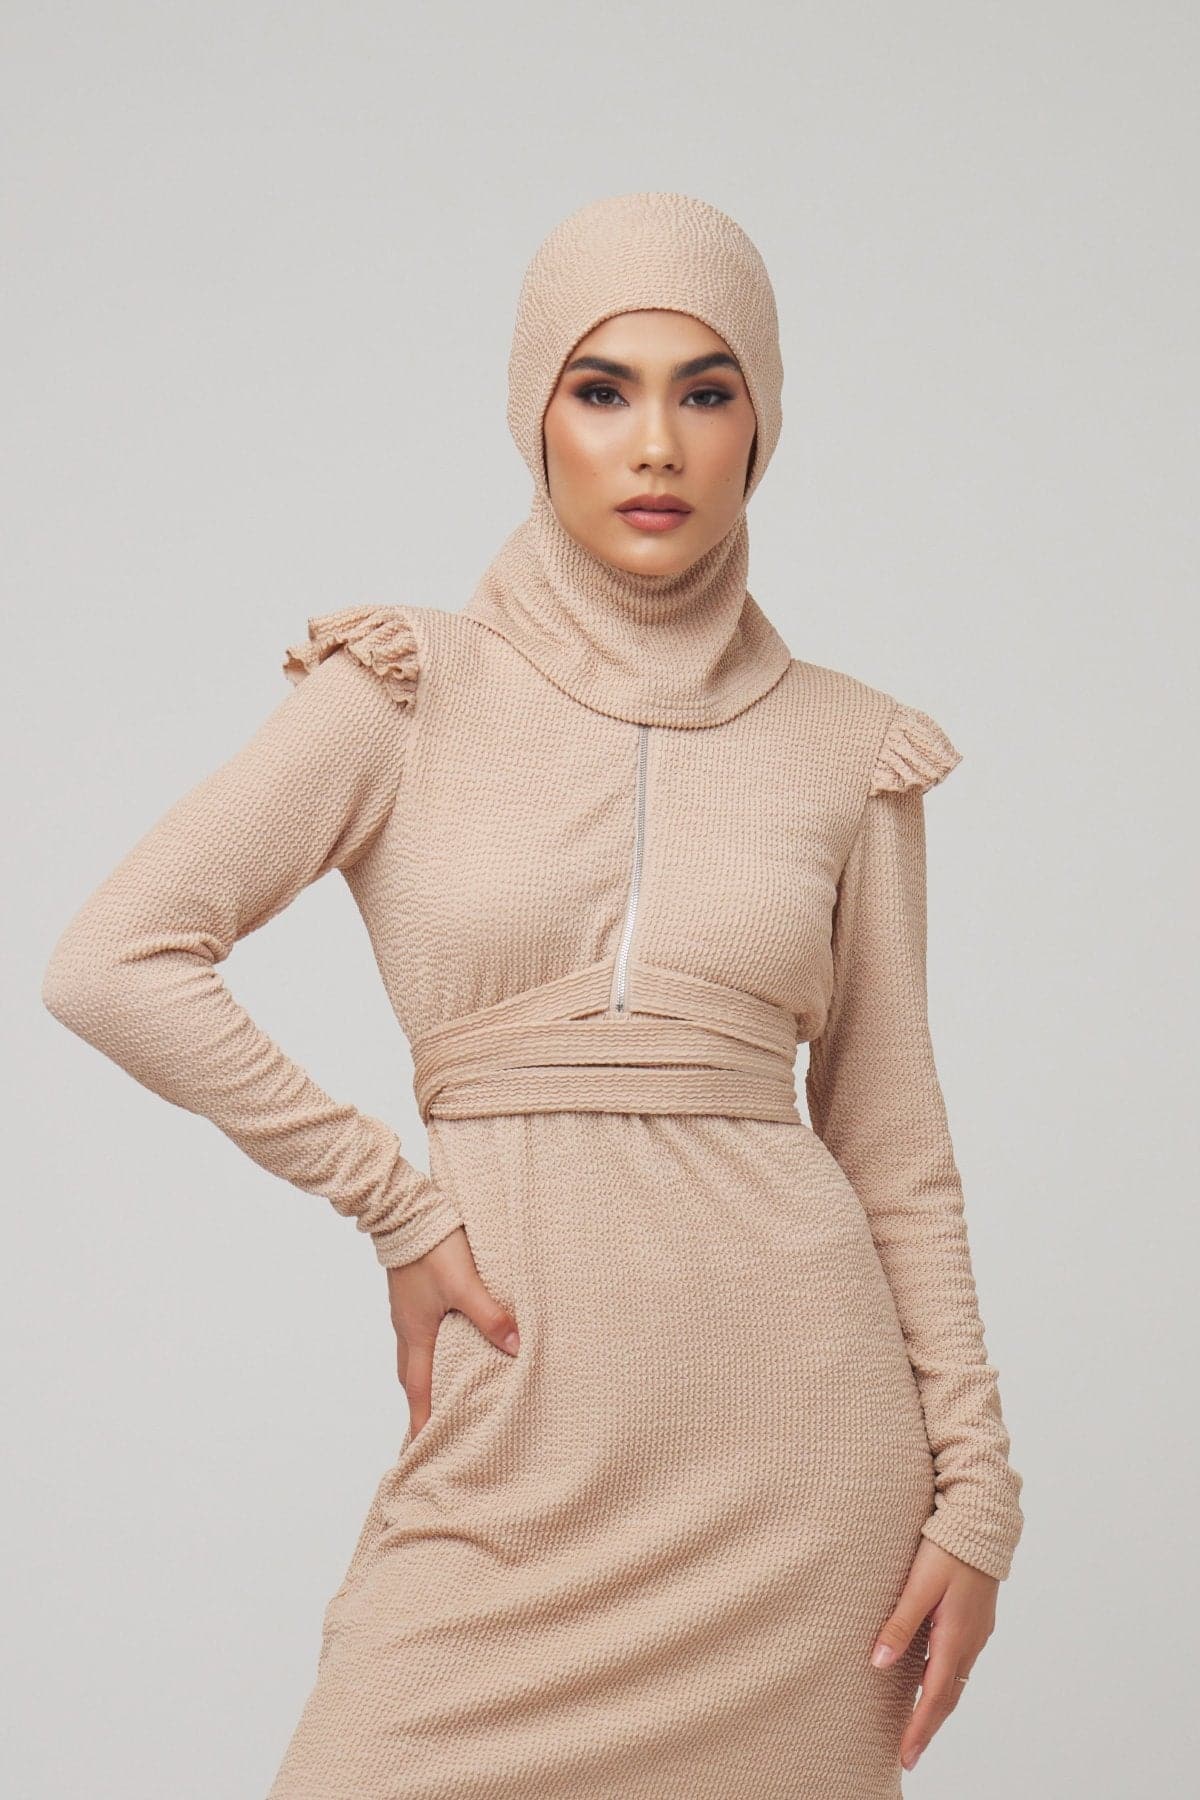 Hijab Magnet Pins - Modest Nude – Zahraa The Label